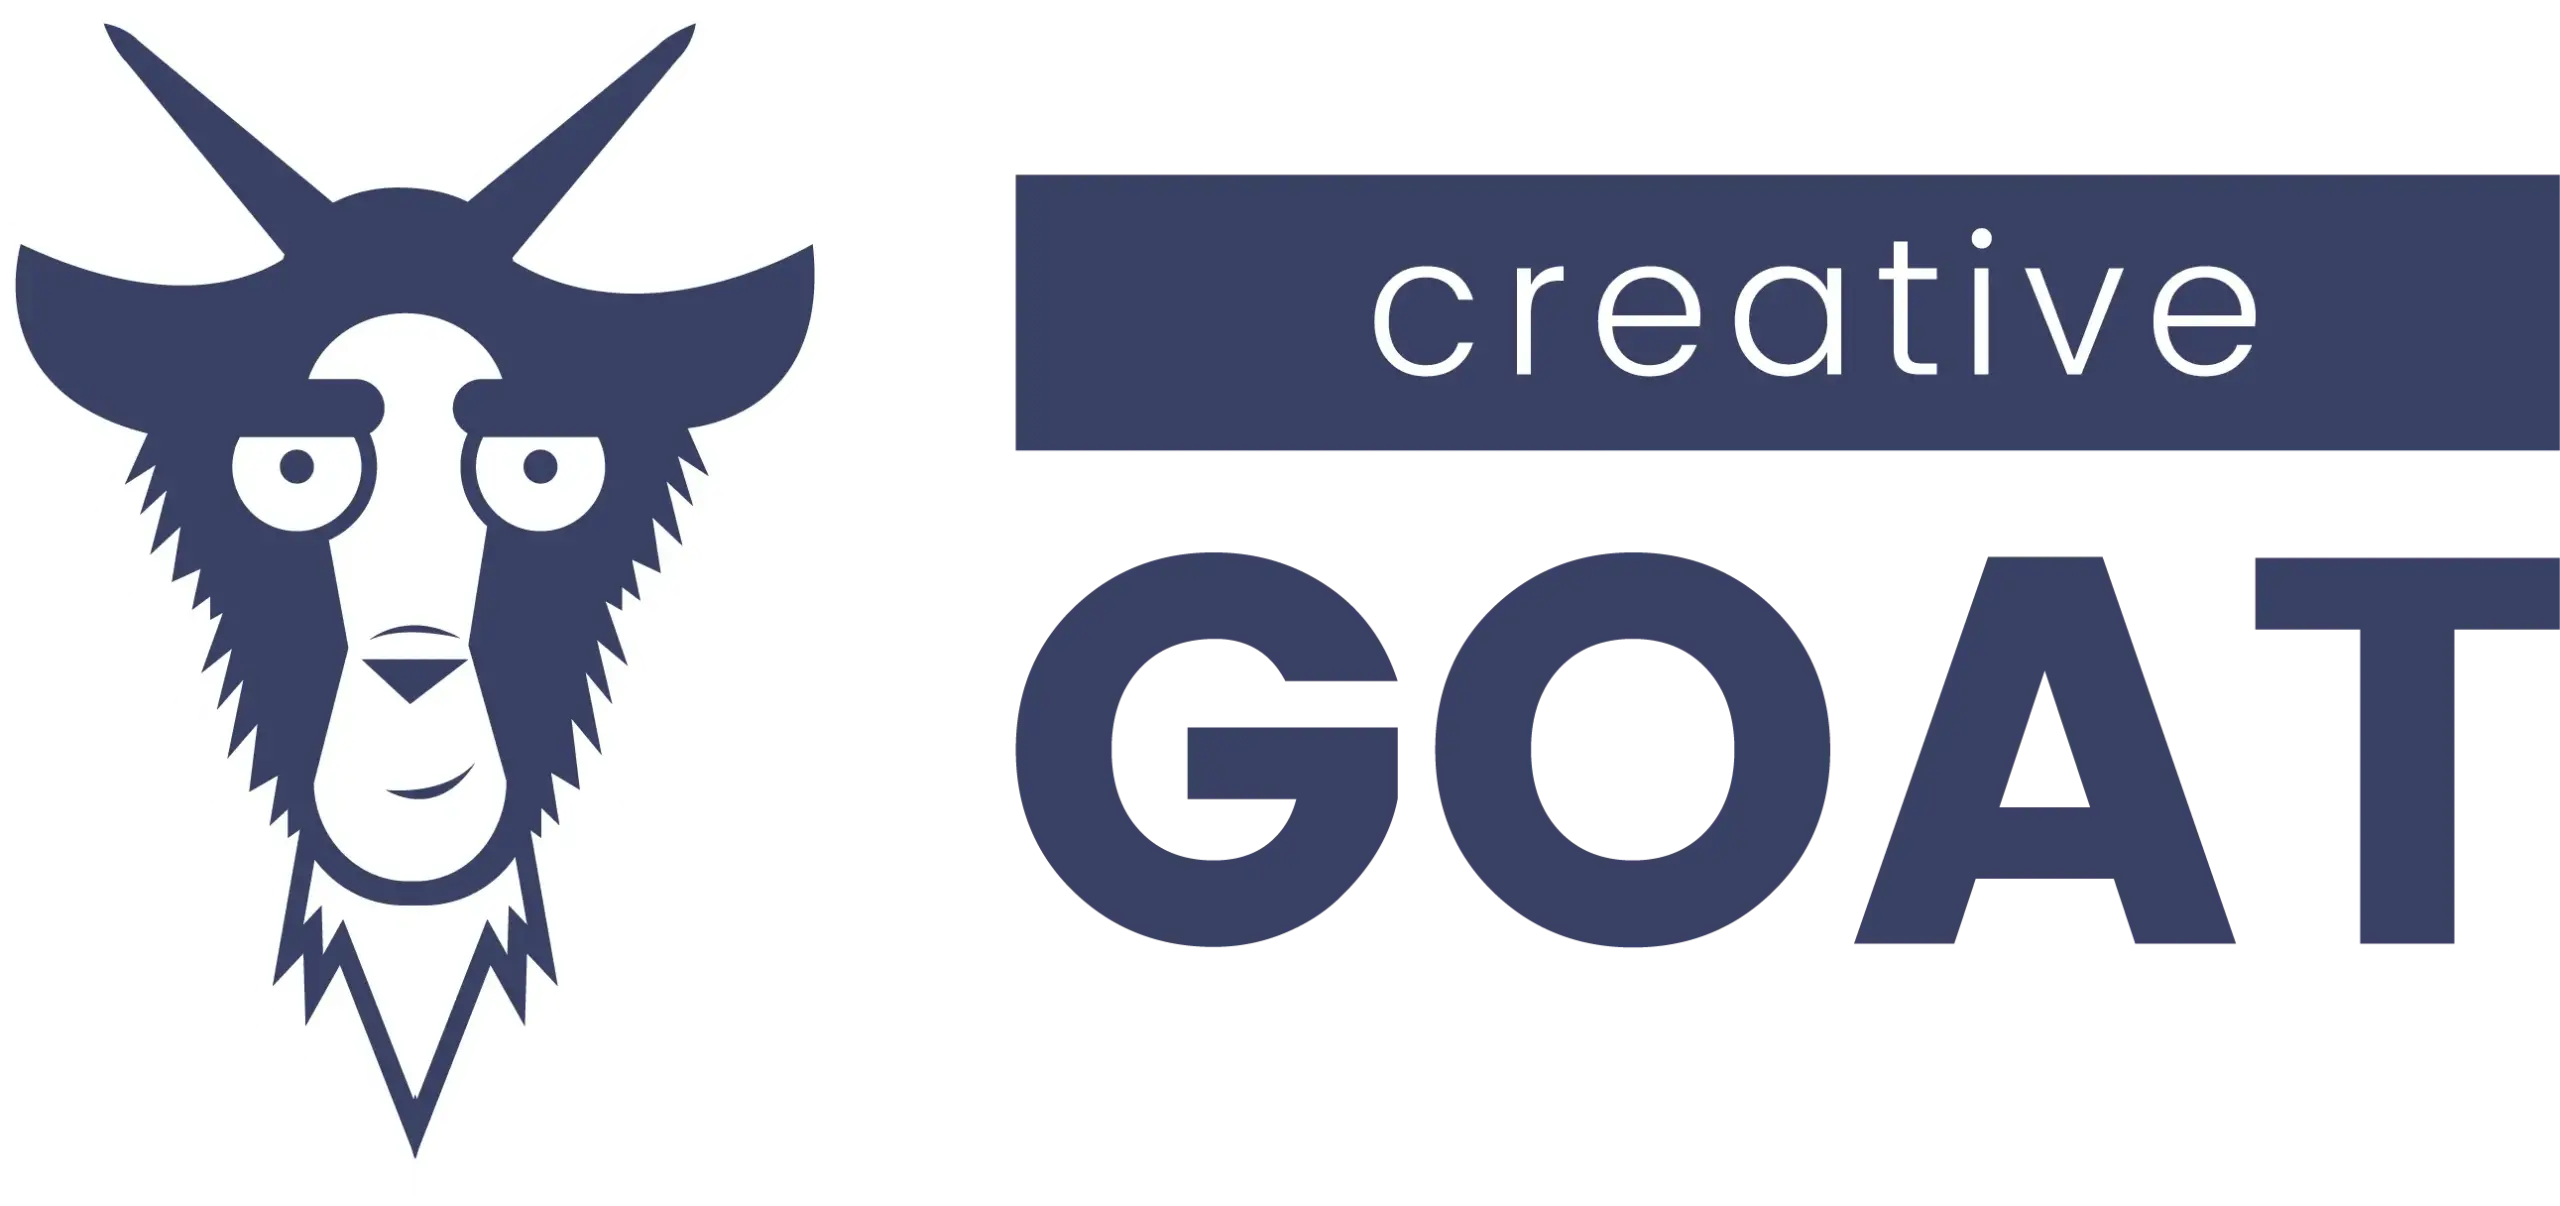 Creative GOAT Engineering & Software Services in Ontario - 3D Scanning, E-Commerce Solutions, Software Development, Reverse Engineering, Mechanical Designing